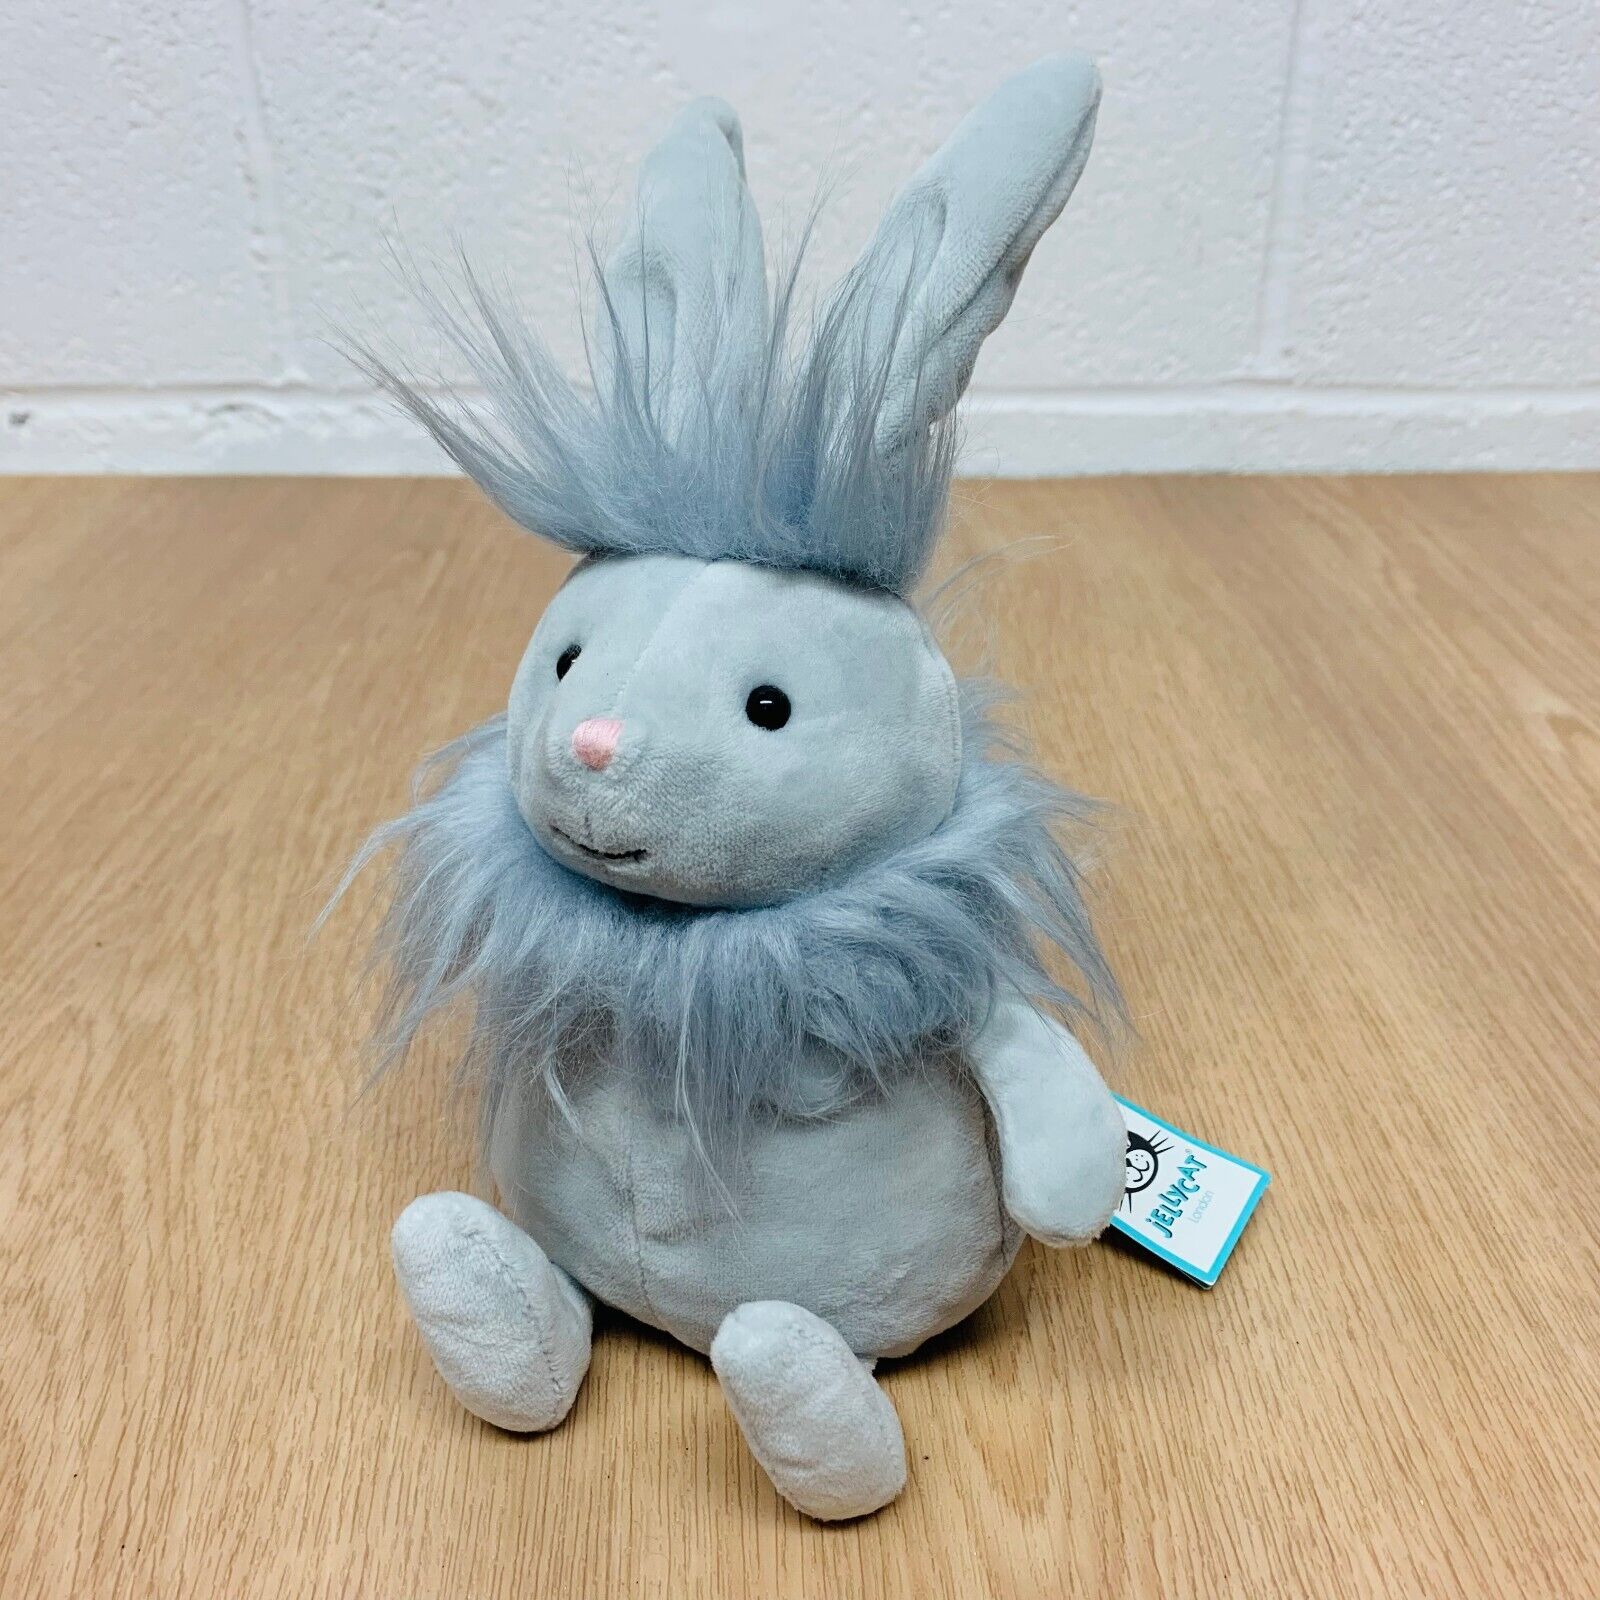 Official Jellycat Silver Flumpet Bunny Rabbit Soft Cuddly Toy Plush with Tag